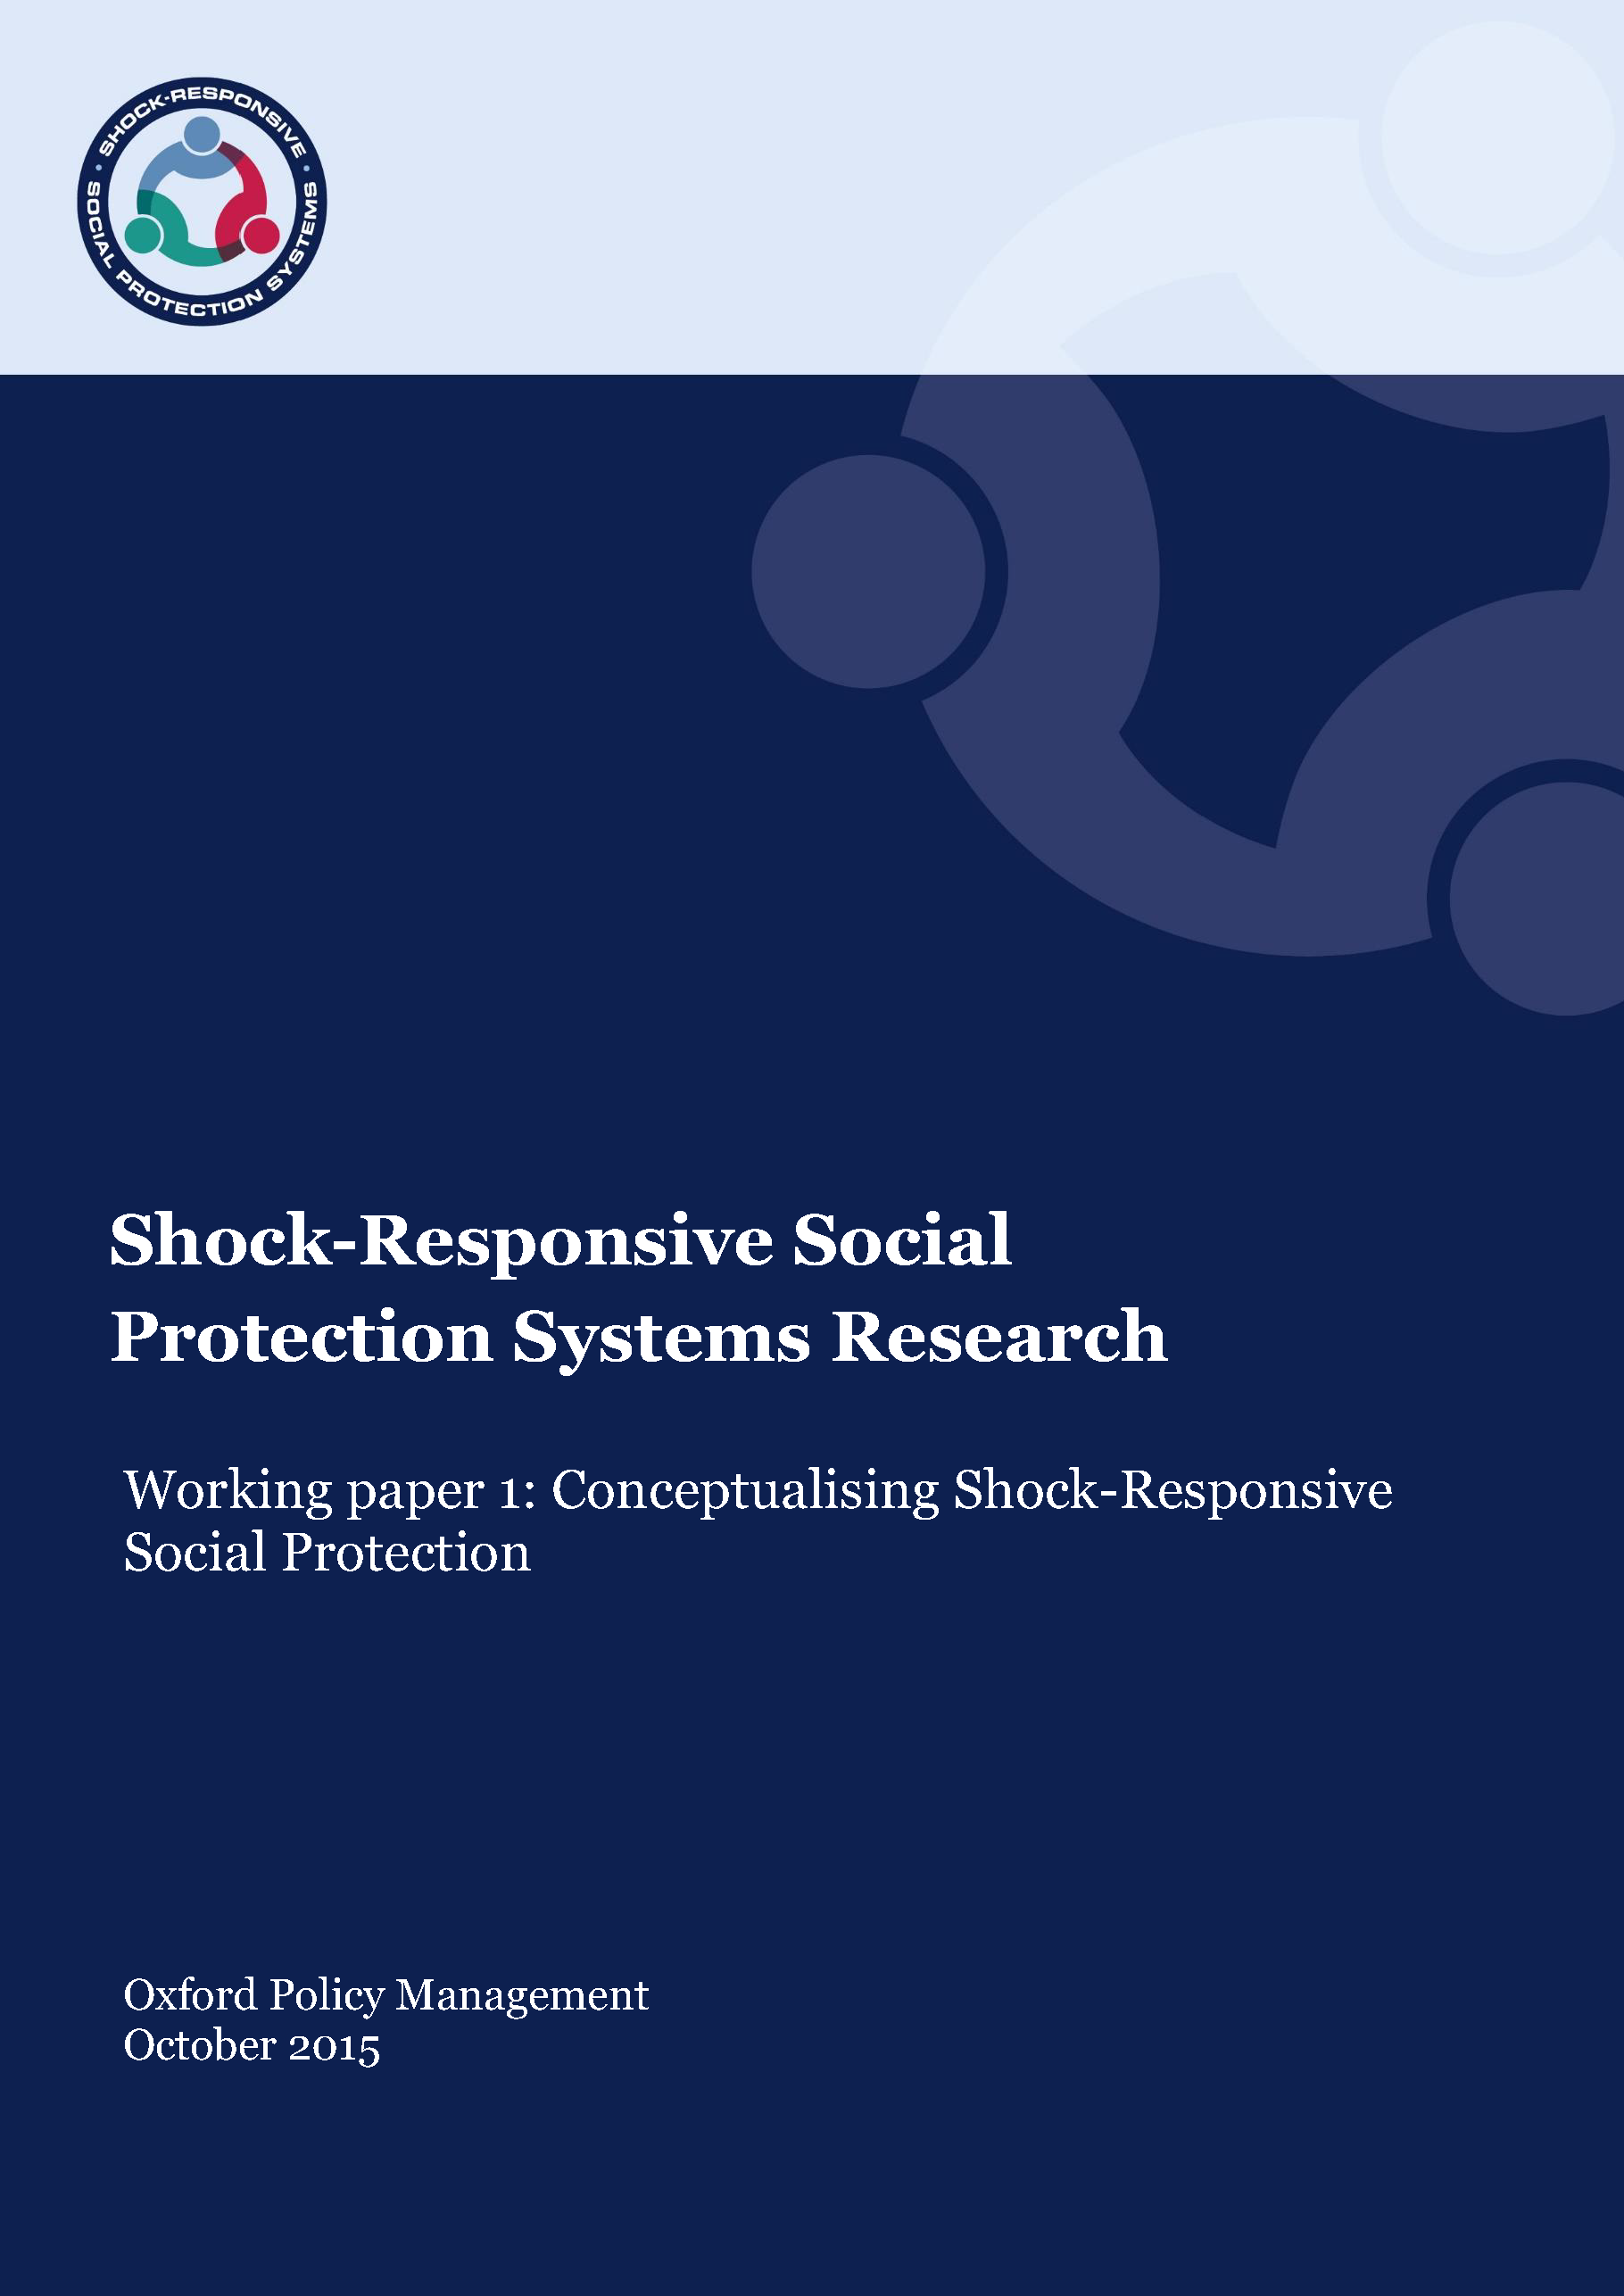 Cover page for Shock-Responsive Social Protection Systems Research